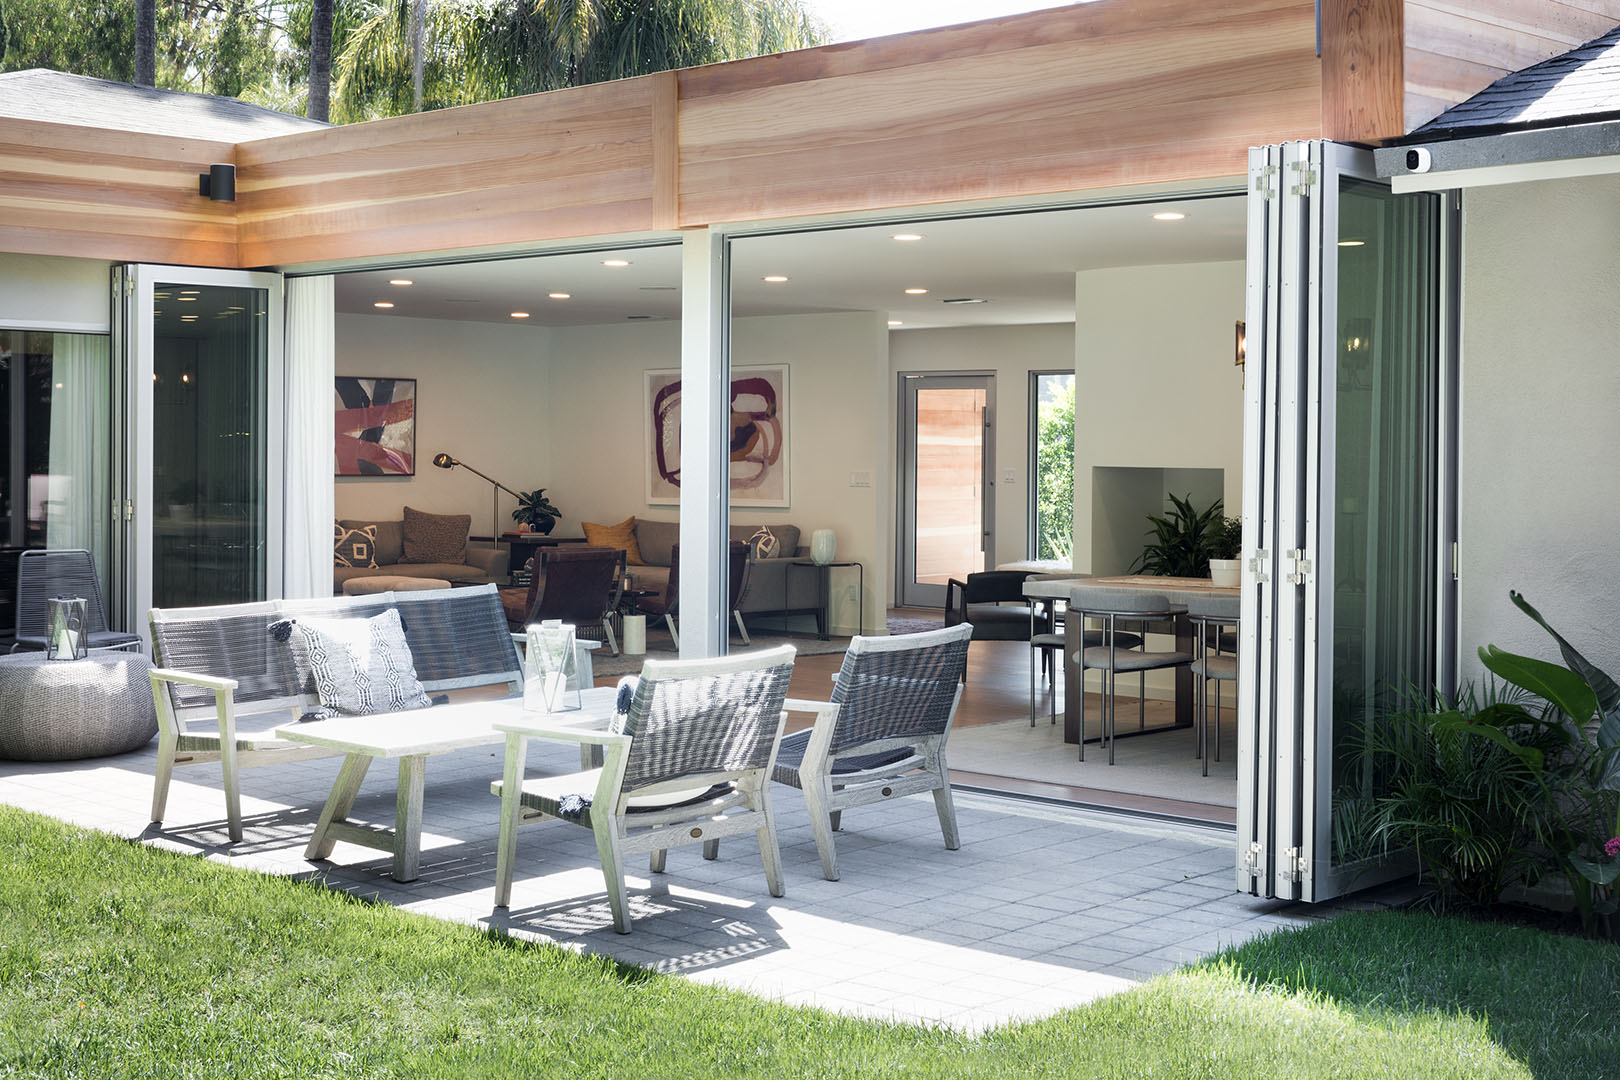 A bi-parting, bi-fold door completely opens the living and dining room to patio seating.